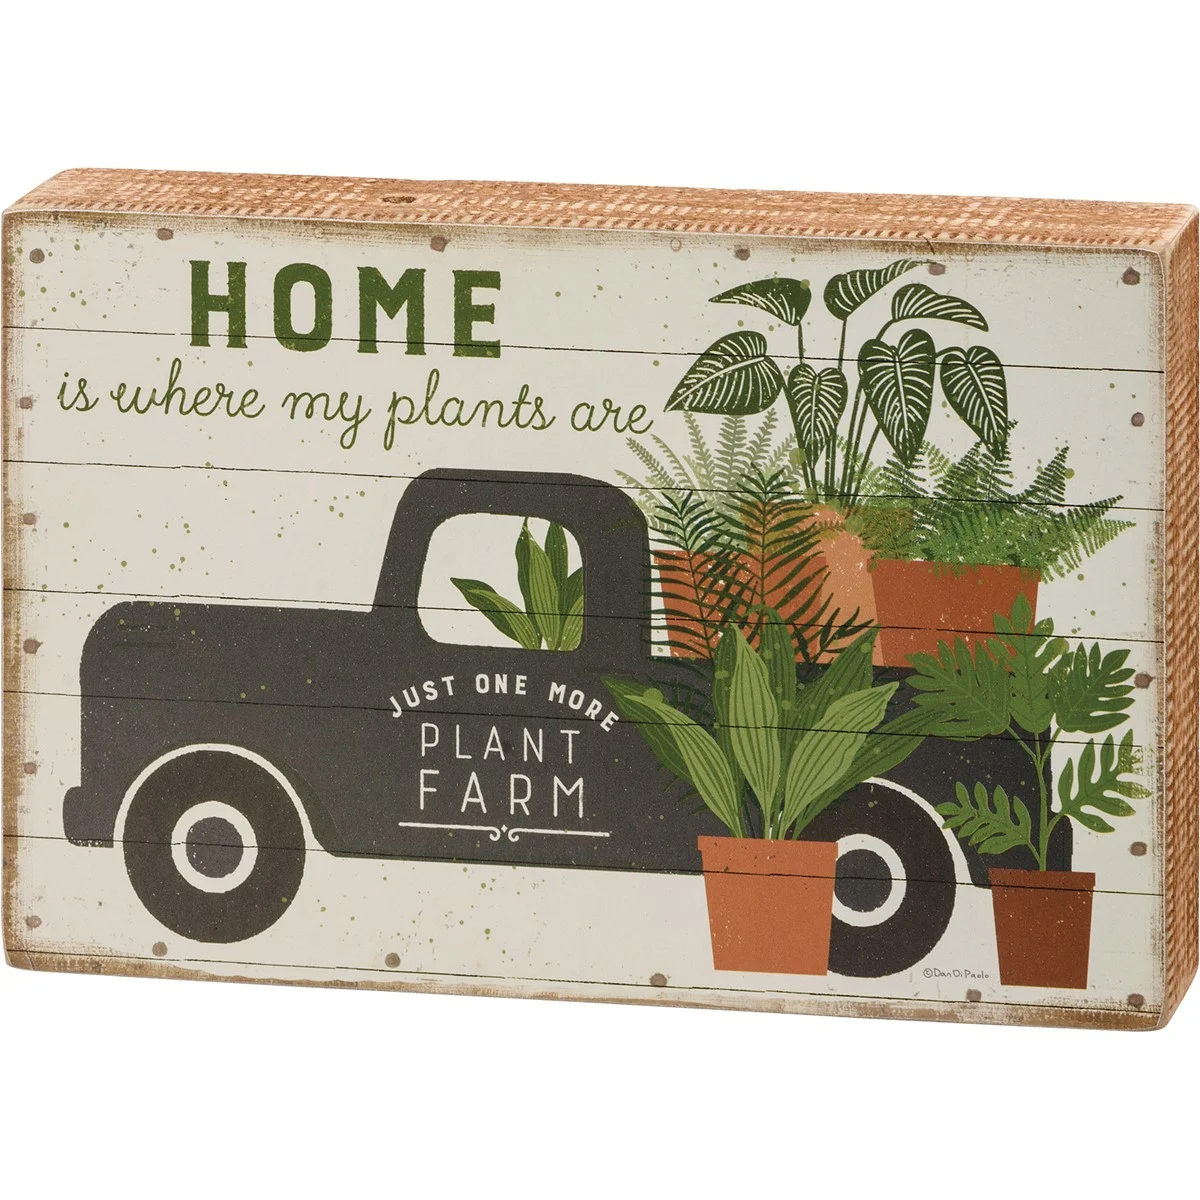 Just One More Plant Farm Truck 6.5" Box Sign